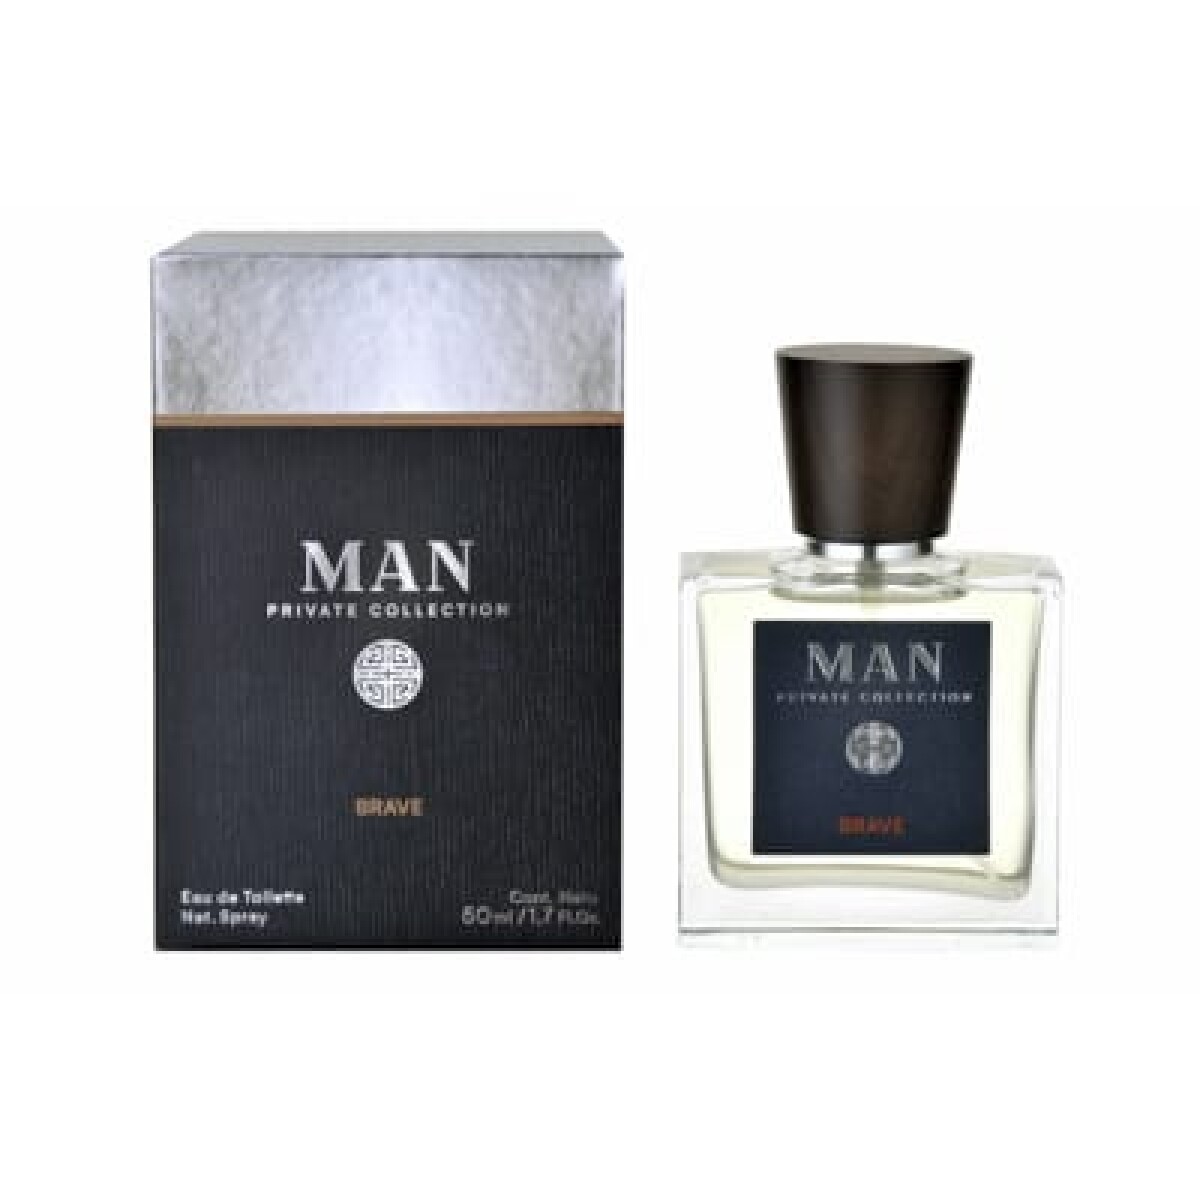 Perfume Man Private Collection Brave Edt 50 ml 